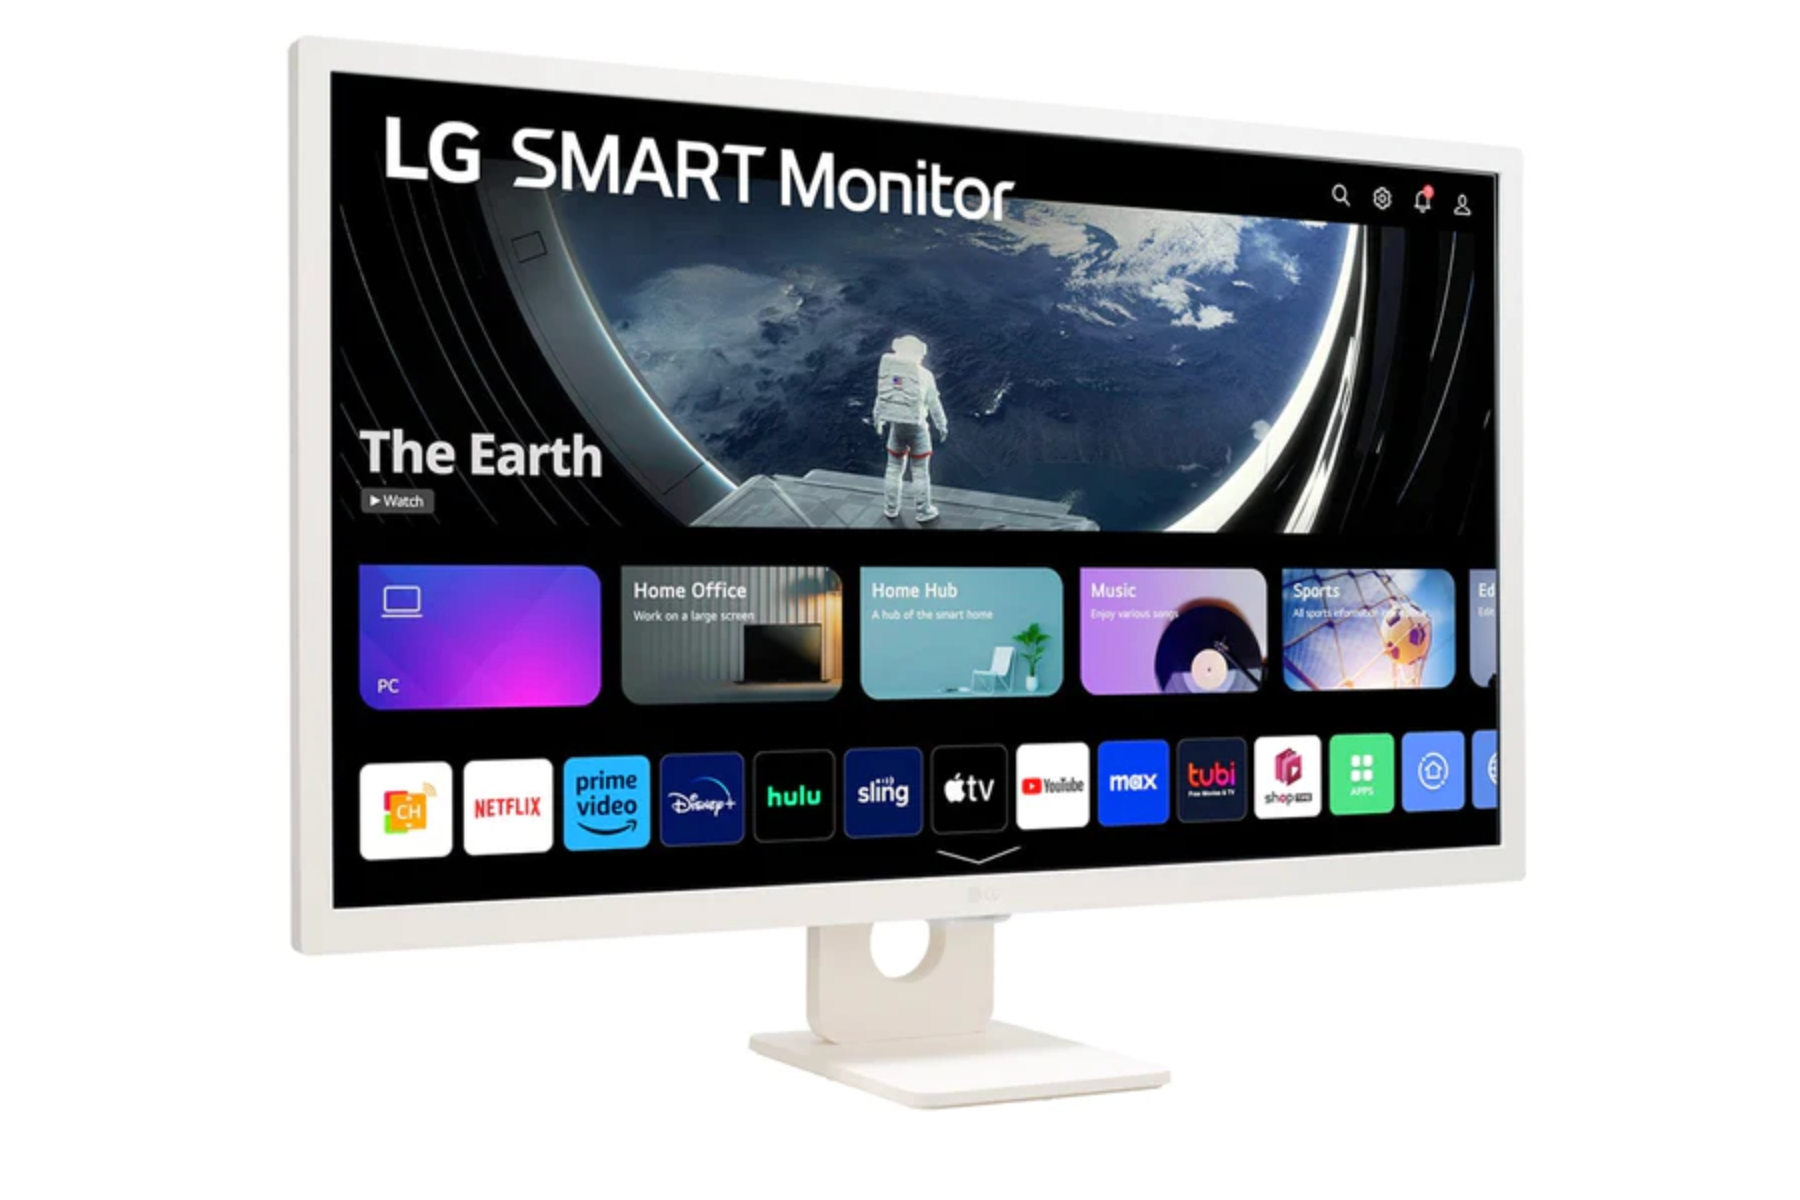 LG 32SR50F-W Smart Monitor 31.5" Full HD IPS with webOS